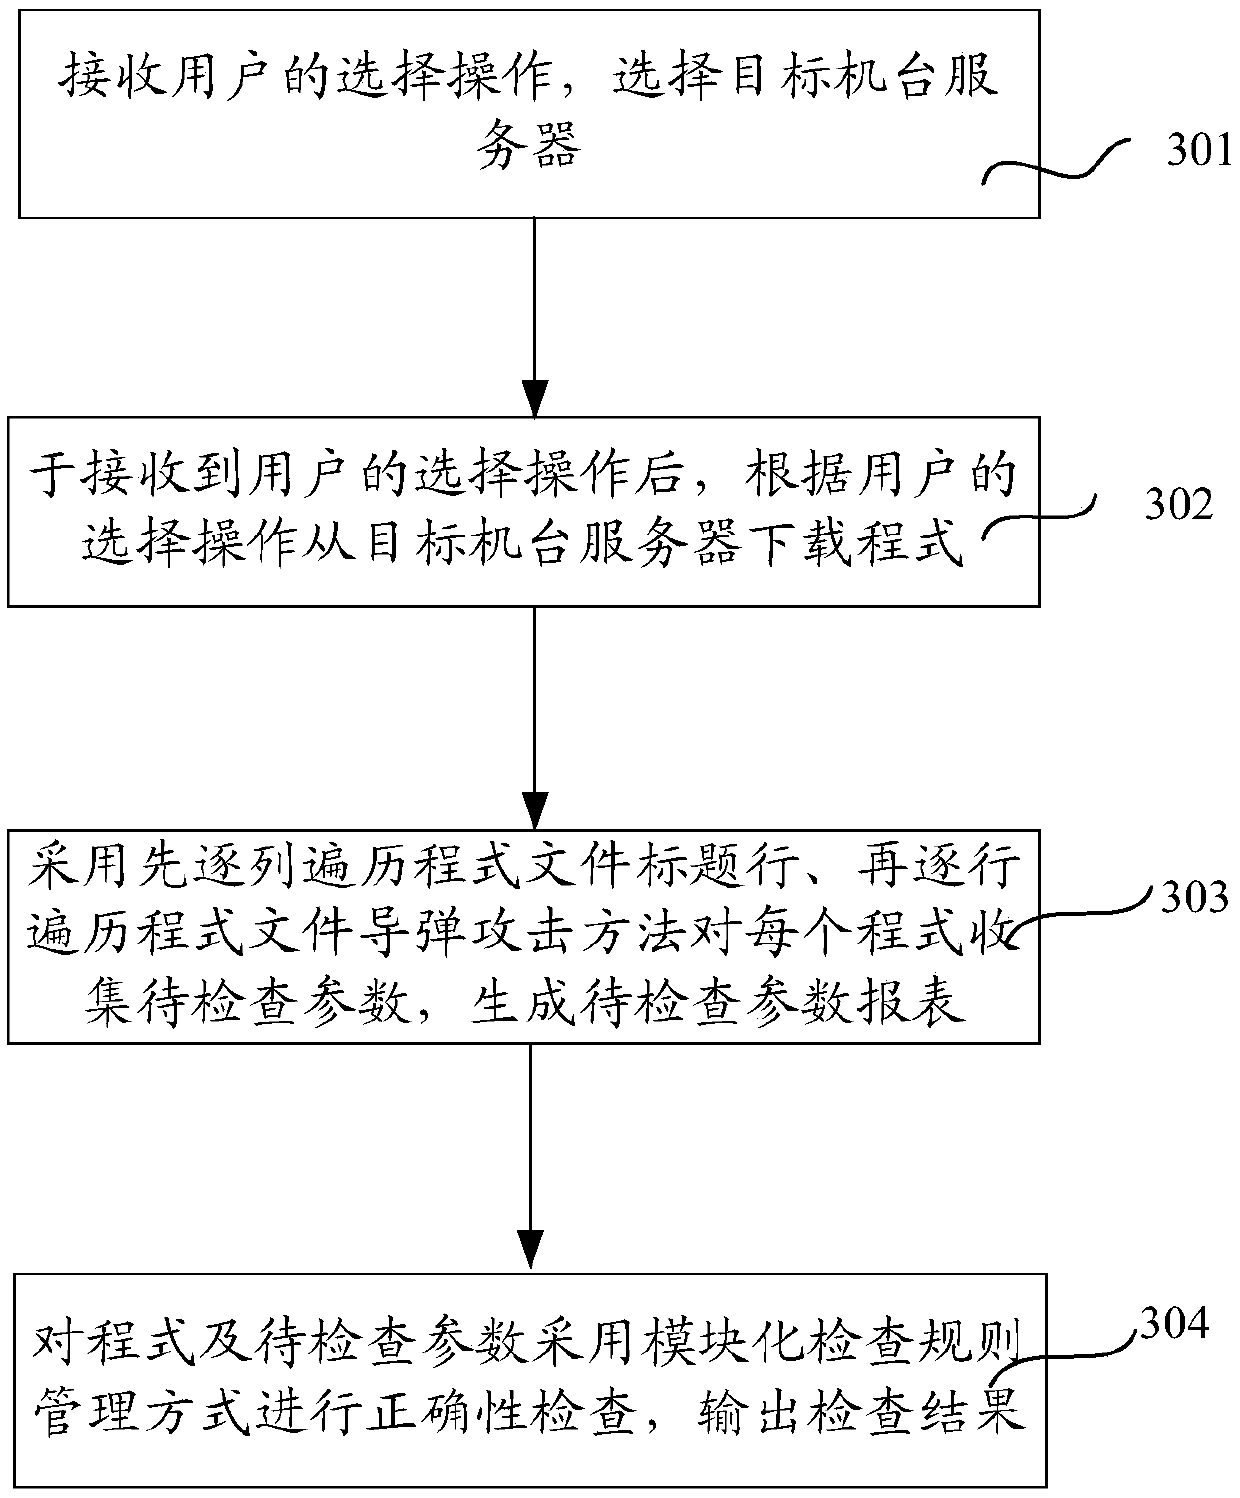 An automated program correctness management method and device for a nissin ion implantation machine